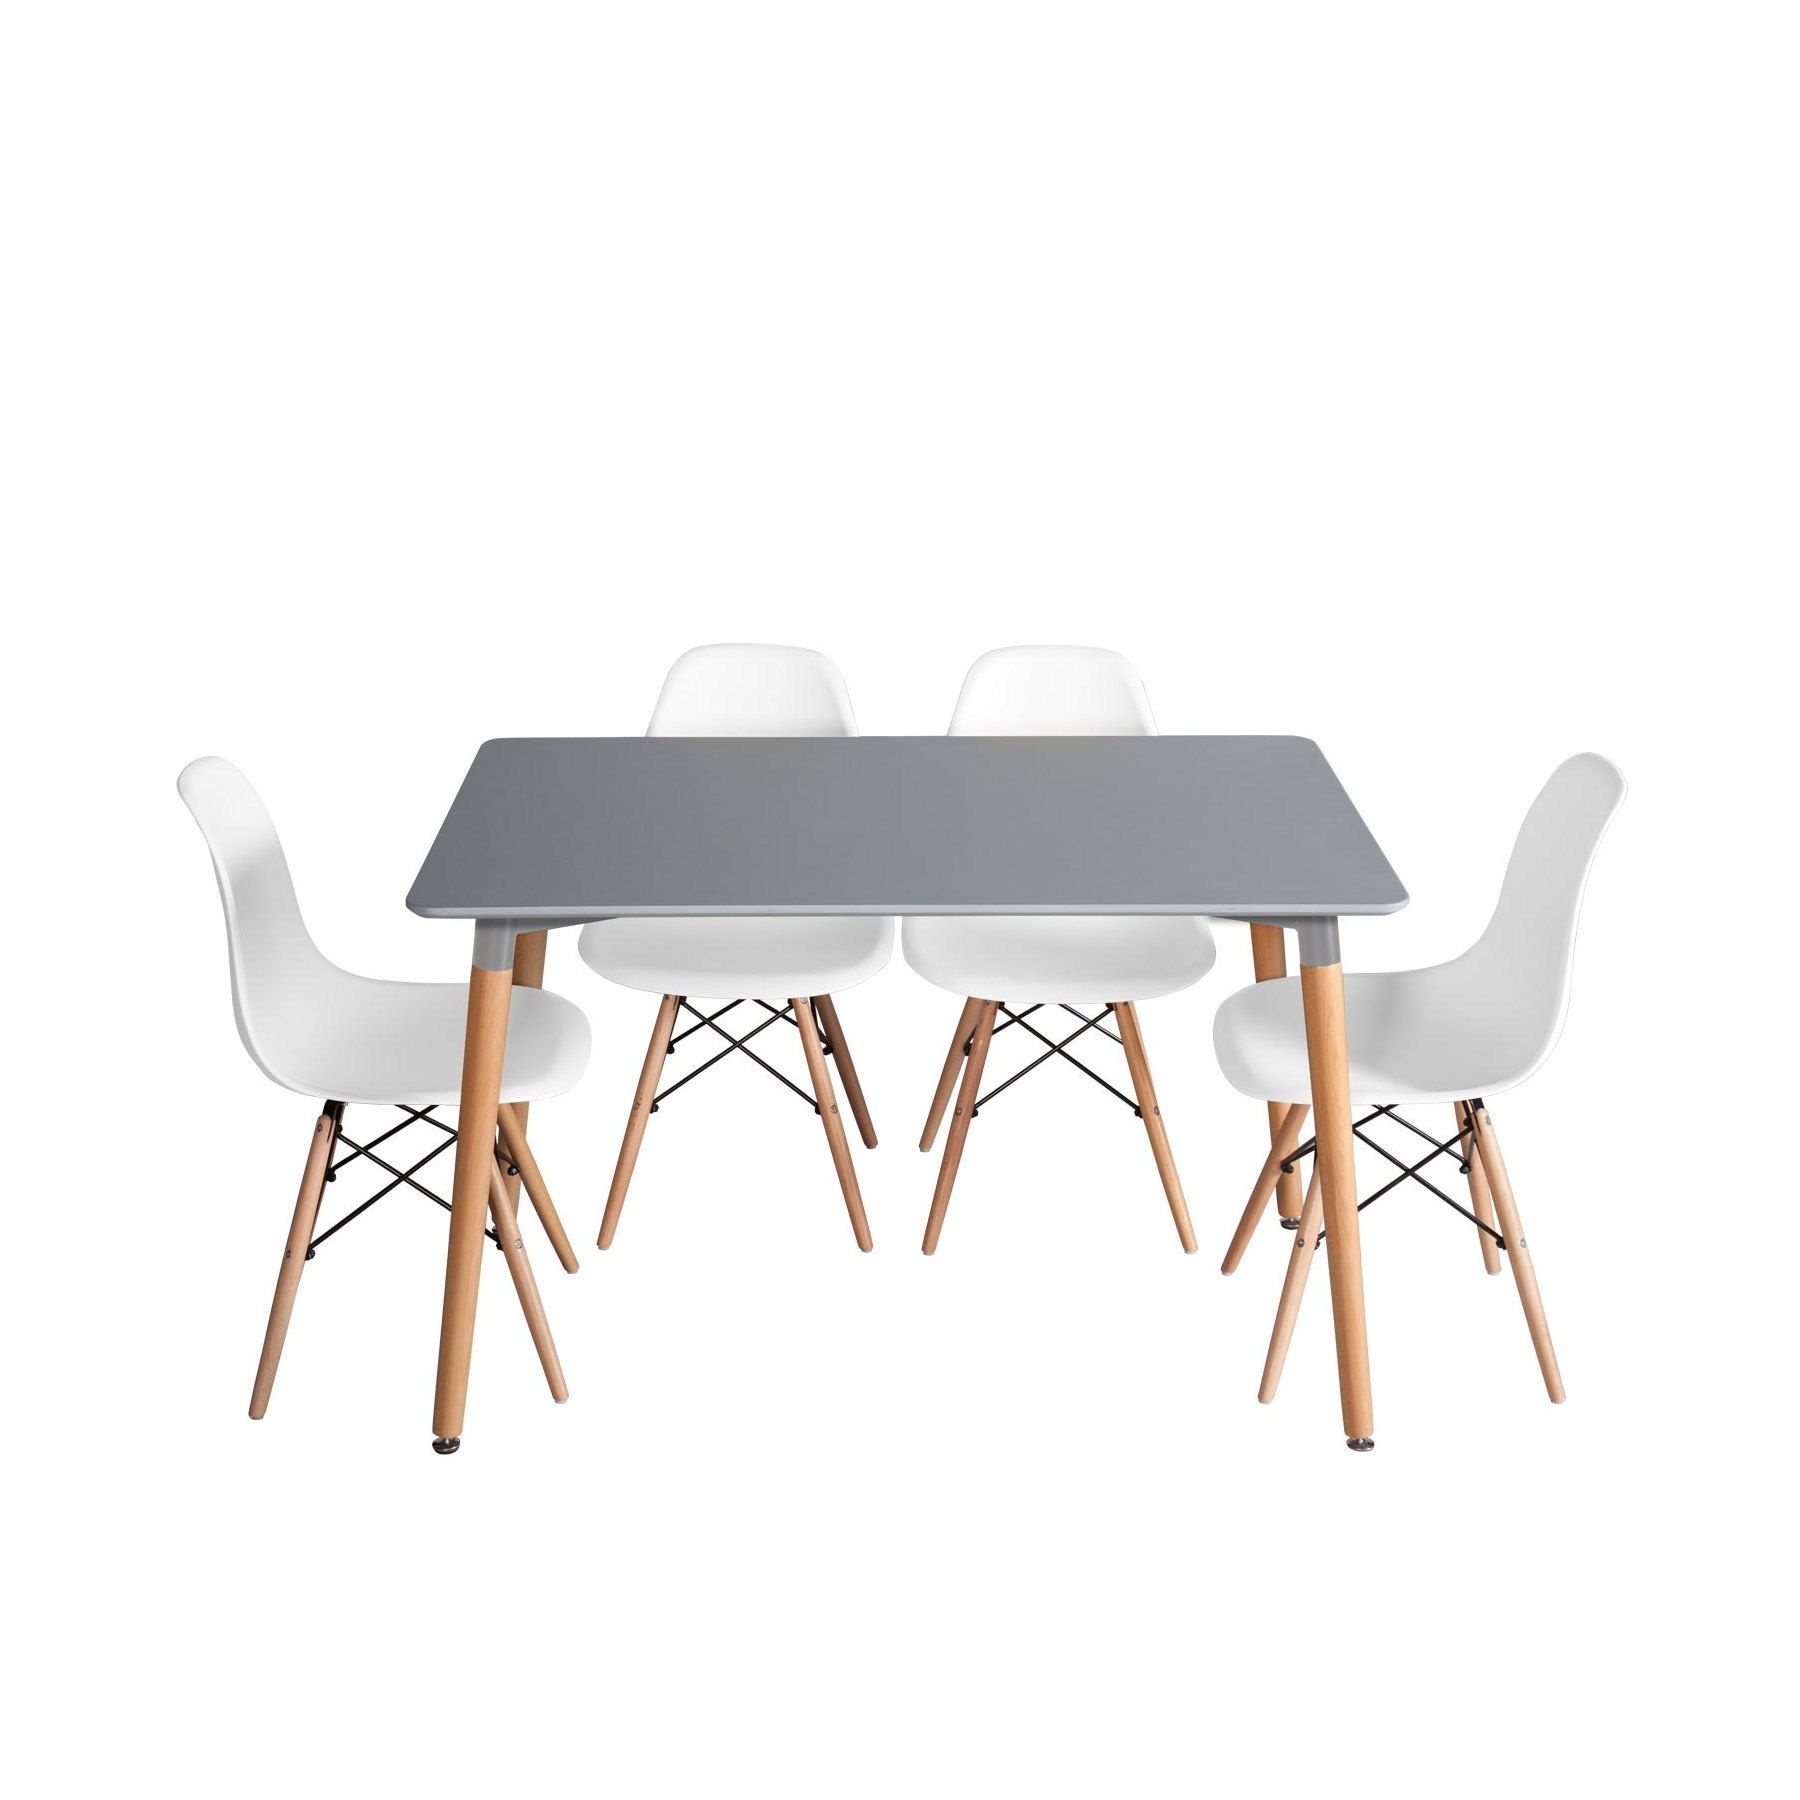 PACK TABLE BEECH GRIS ET 4 CHAISES TOWER WOOD BLANCHES